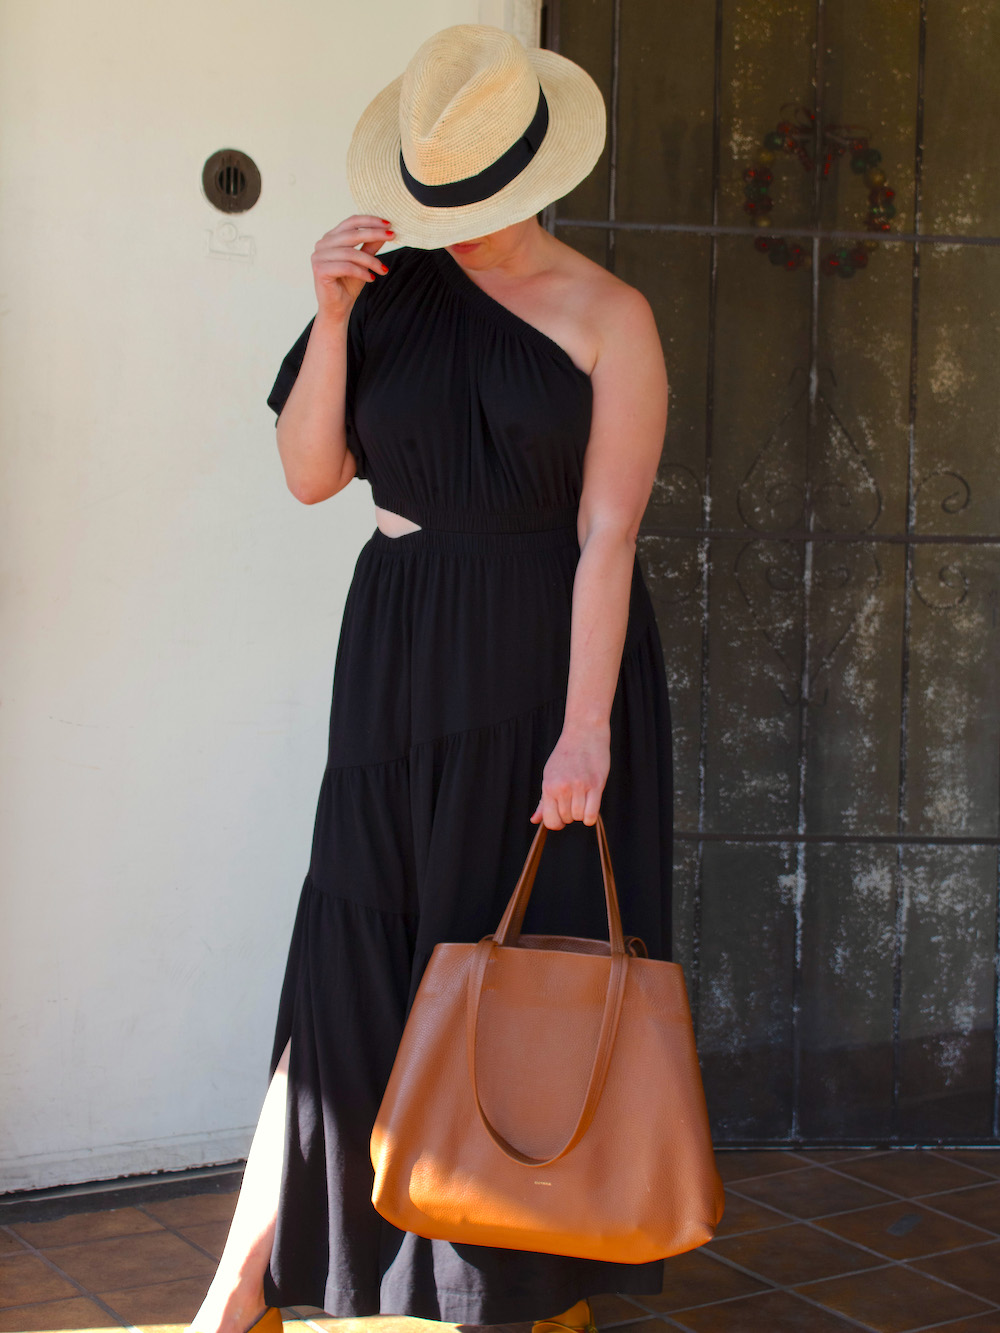 A woman with a hat tilted across her face, wearing a one-shoulder Cuyana dress, and holding a leather tote bag.